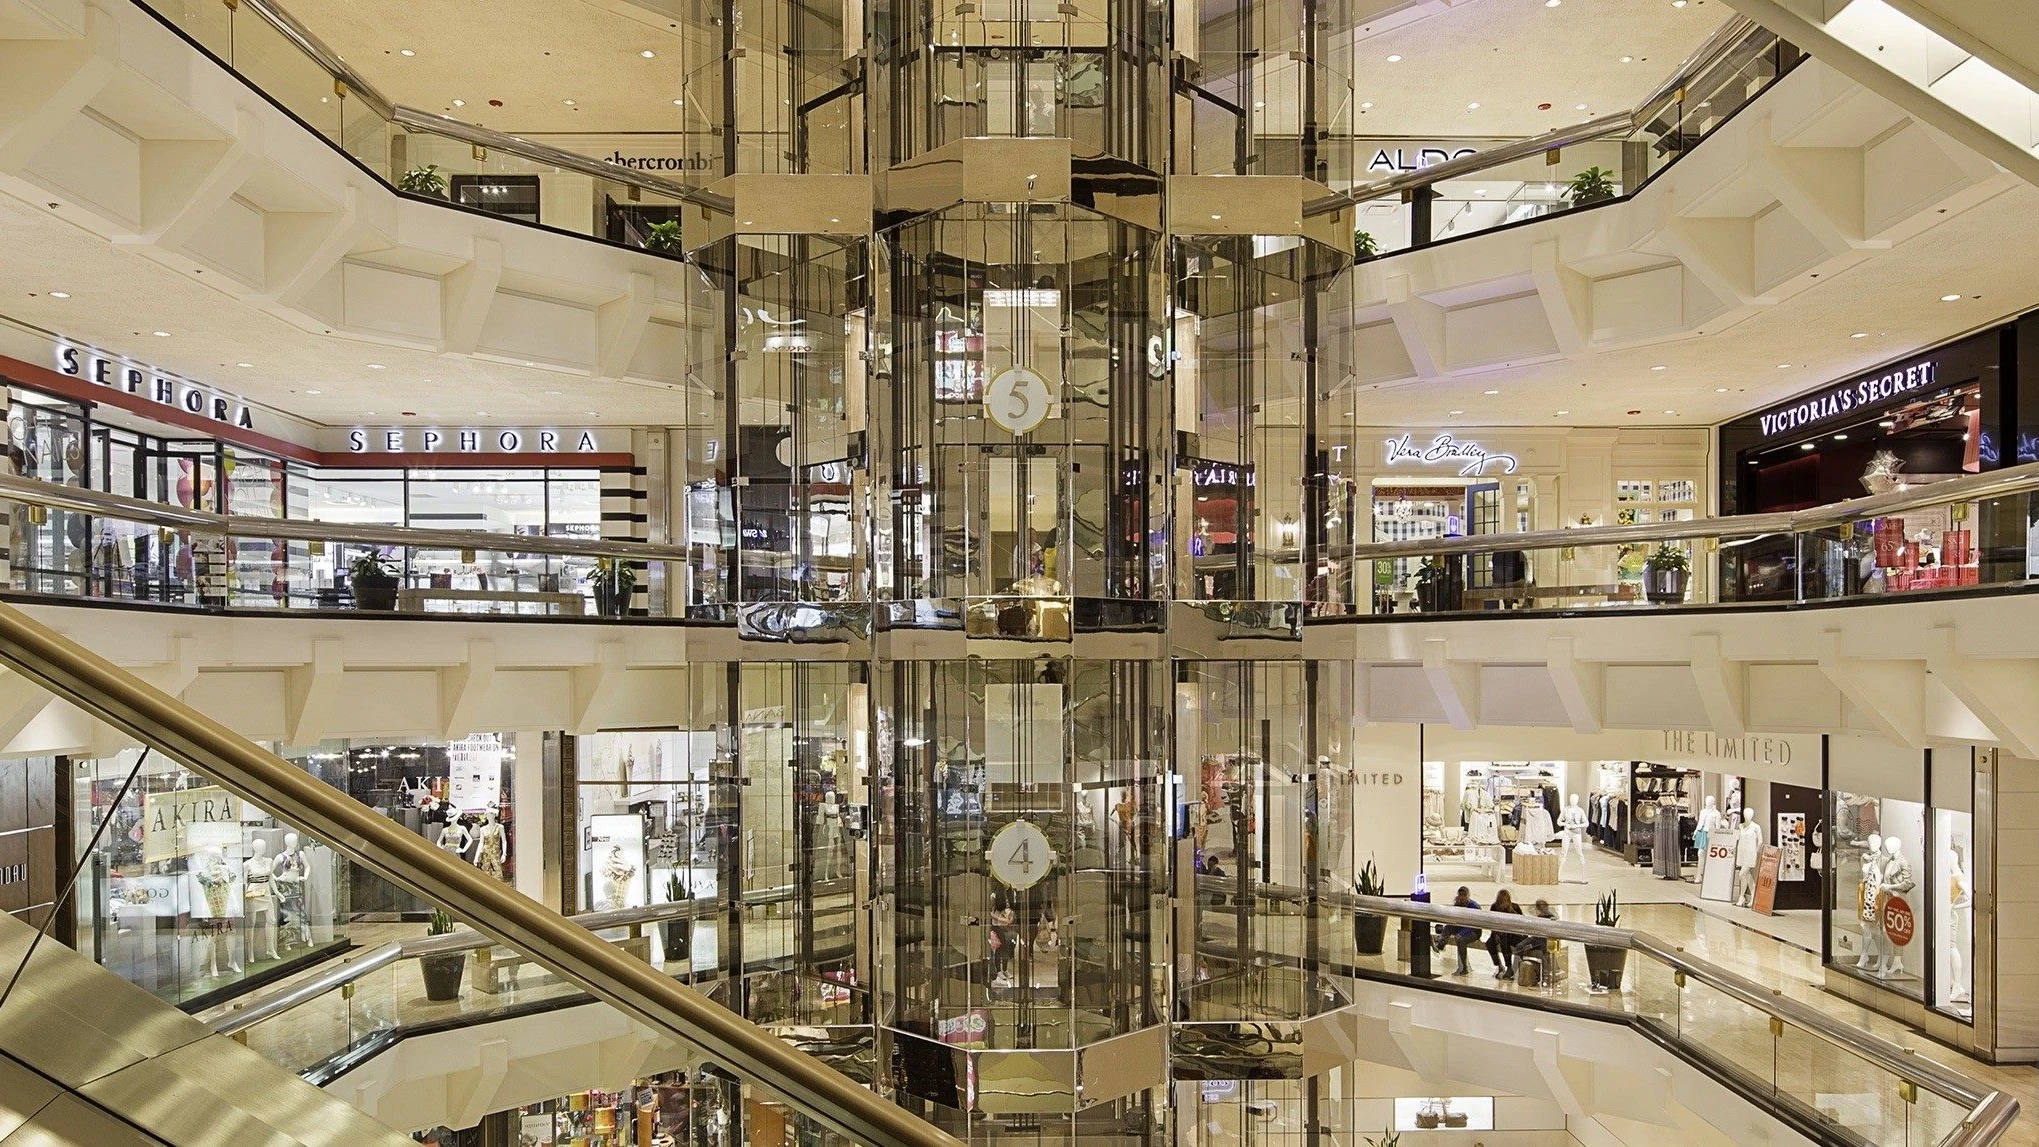 Water Tower Place interiors